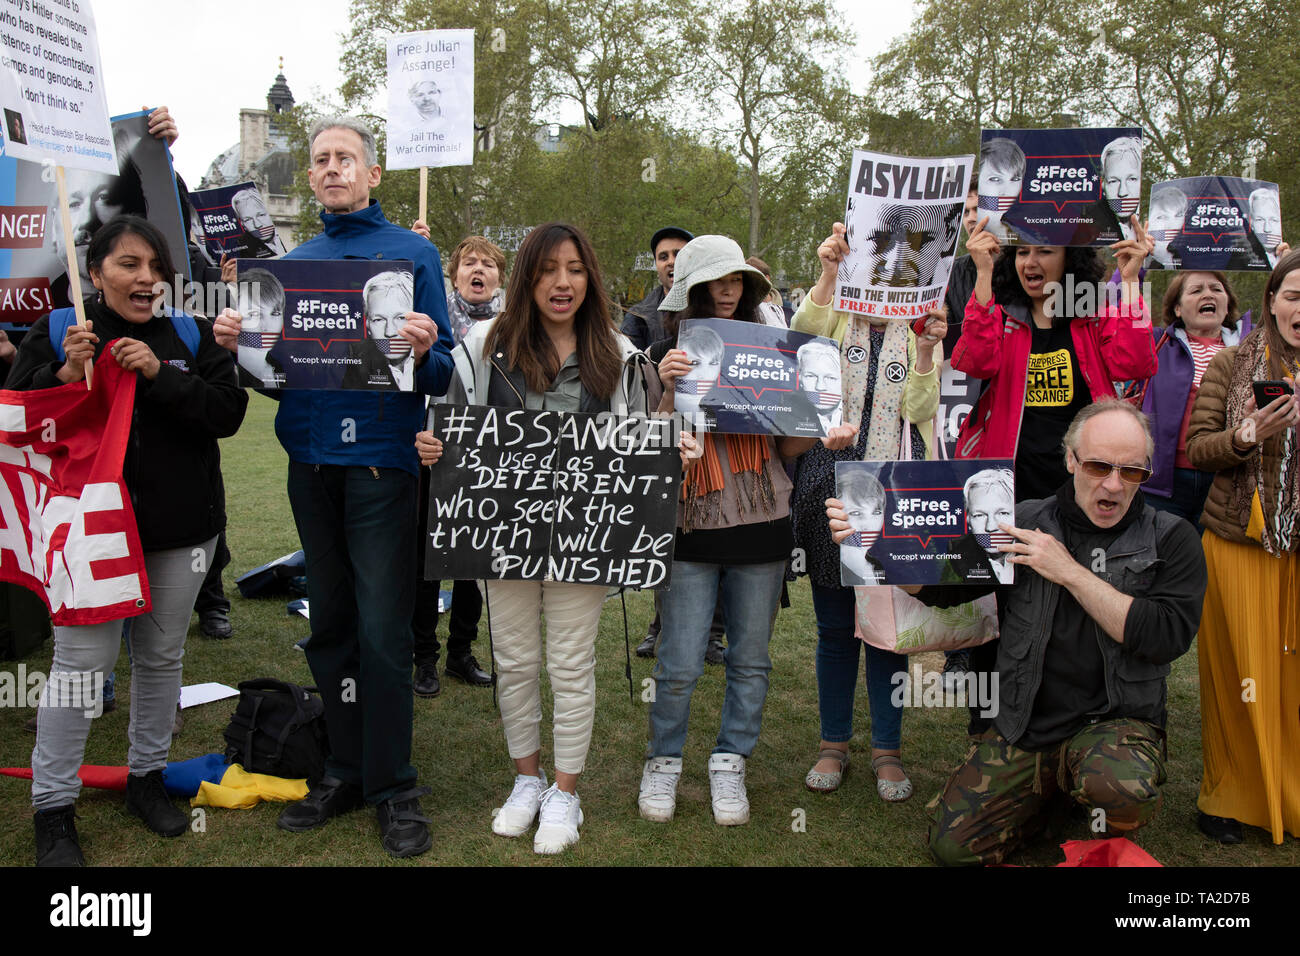 Protesters including rights campaigner Peter Tatchell calling to free Julian Assange outside Parliament on 24th April 2019 in London, England, United Kingdom. The Wikileaks founder Julian Assange was arrested and is currently serving a prison sentence after he was found guilty of breaching the Bail Act and on 1 May 2019 was sentenced to 50 weeks in prison in the United Kingdom. Peter Tatchell is a British human rights campaigner, originally from Australia, best known for his work with LGBT social movements. Stock Photo